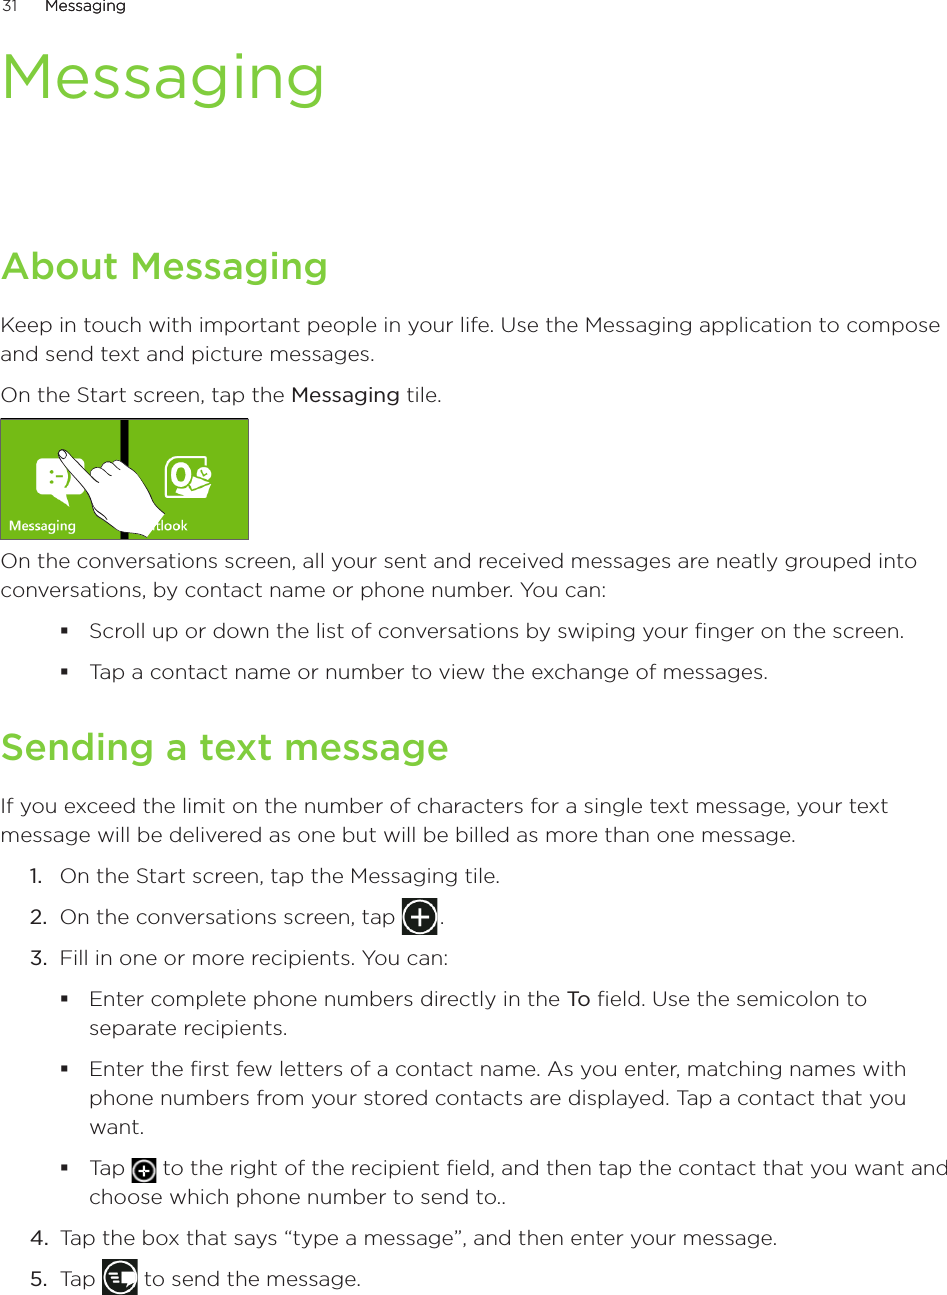 31      MessagingMessaging      MessagingAbout MessagingKeep in touch with important people in your life. Use the Messaging application to compose and send text and picture messages.On the Start screen, tap the Messaging tile.On the conversations screen, all your sent and received messages are neatly grouped into conversations, by contact name or phone number. You can:Scroll up or down the list of conversations by swiping your finger on the screen.Tap a contact name or number to view the exchange of messages.Sending a text messageIf you exceed the limit on the number of characters for a single text message, your text message will be delivered as one but will be billed as more than one message. On the Start screen, tap the Messaging tile.On the conversations screen, tap   . 3.  Fill in one or more recipients. You can:Enter complete phone numbers directly in the To field. Use the semicolon to separate recipients.Enter the first few letters of a contact name. As you enter, matching names with phone numbers from your stored contacts are displayed. Tap a contact that you want.Tap   to the right of the recipient field, and then tap the contact that you want and choose which phone number to send to..4.  Tap the box that says “type a message”, and then enter your message.5.  Tap   to send the message.1.2.